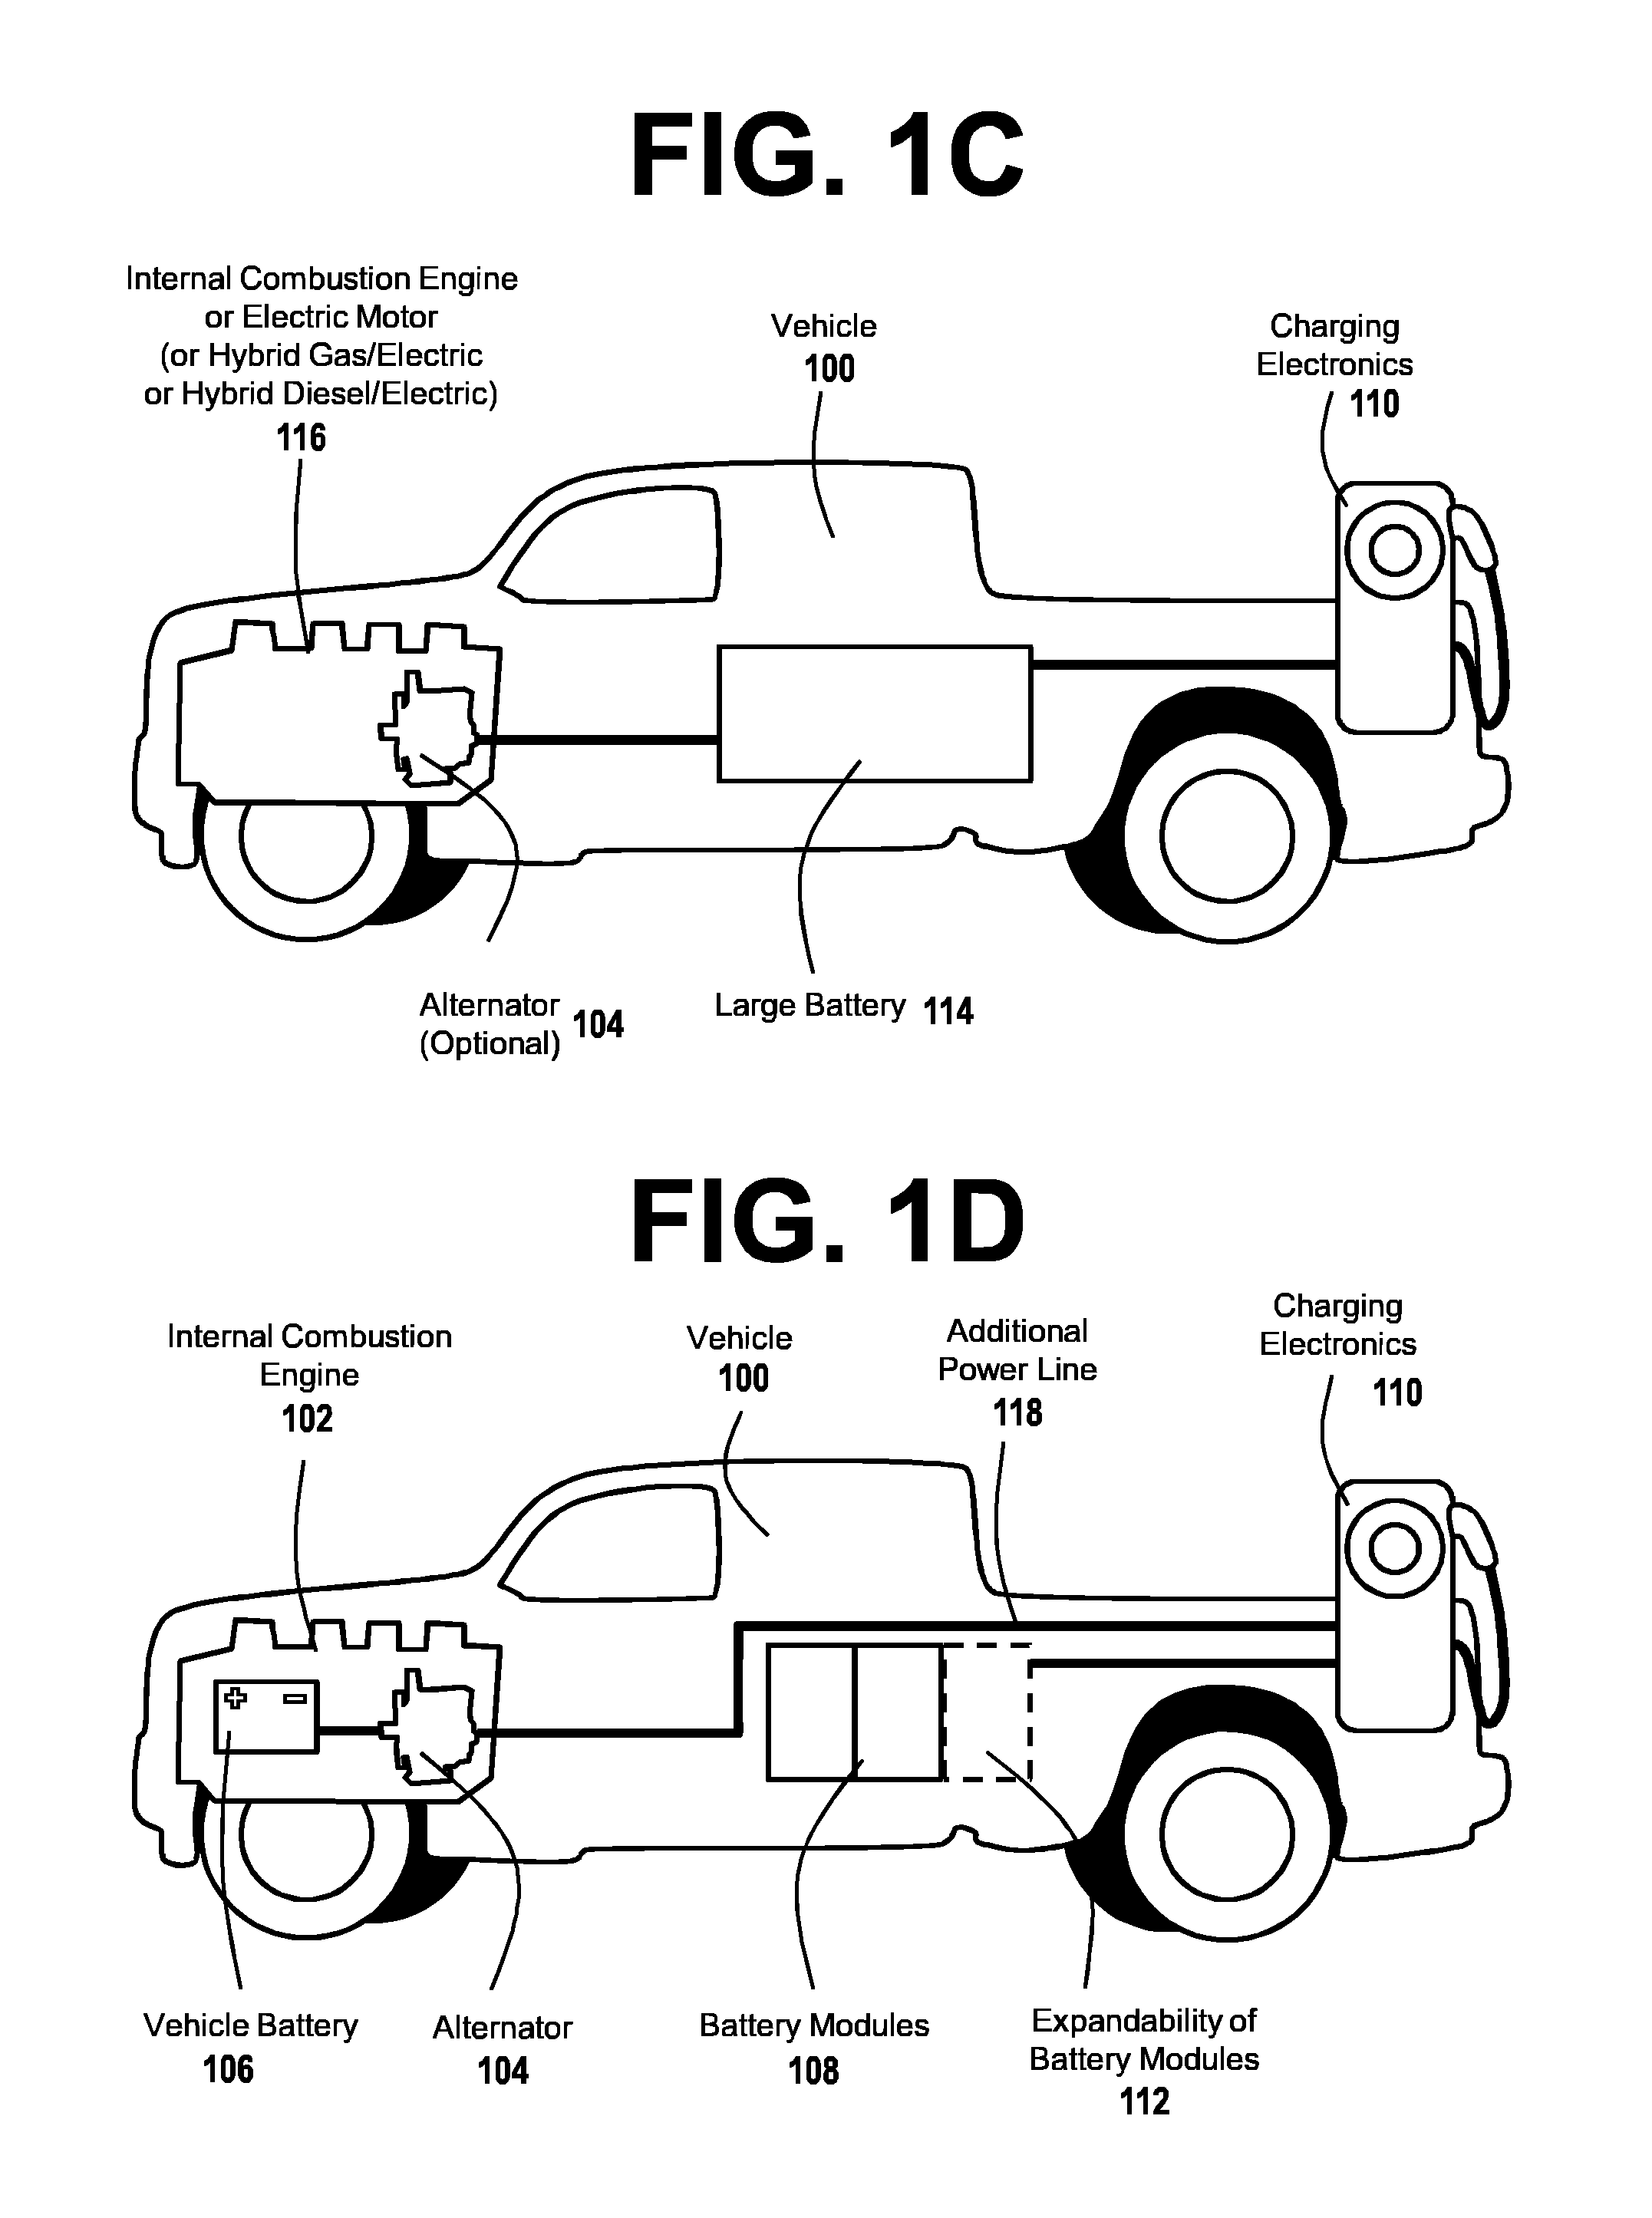 Charging Service Vehicle Network